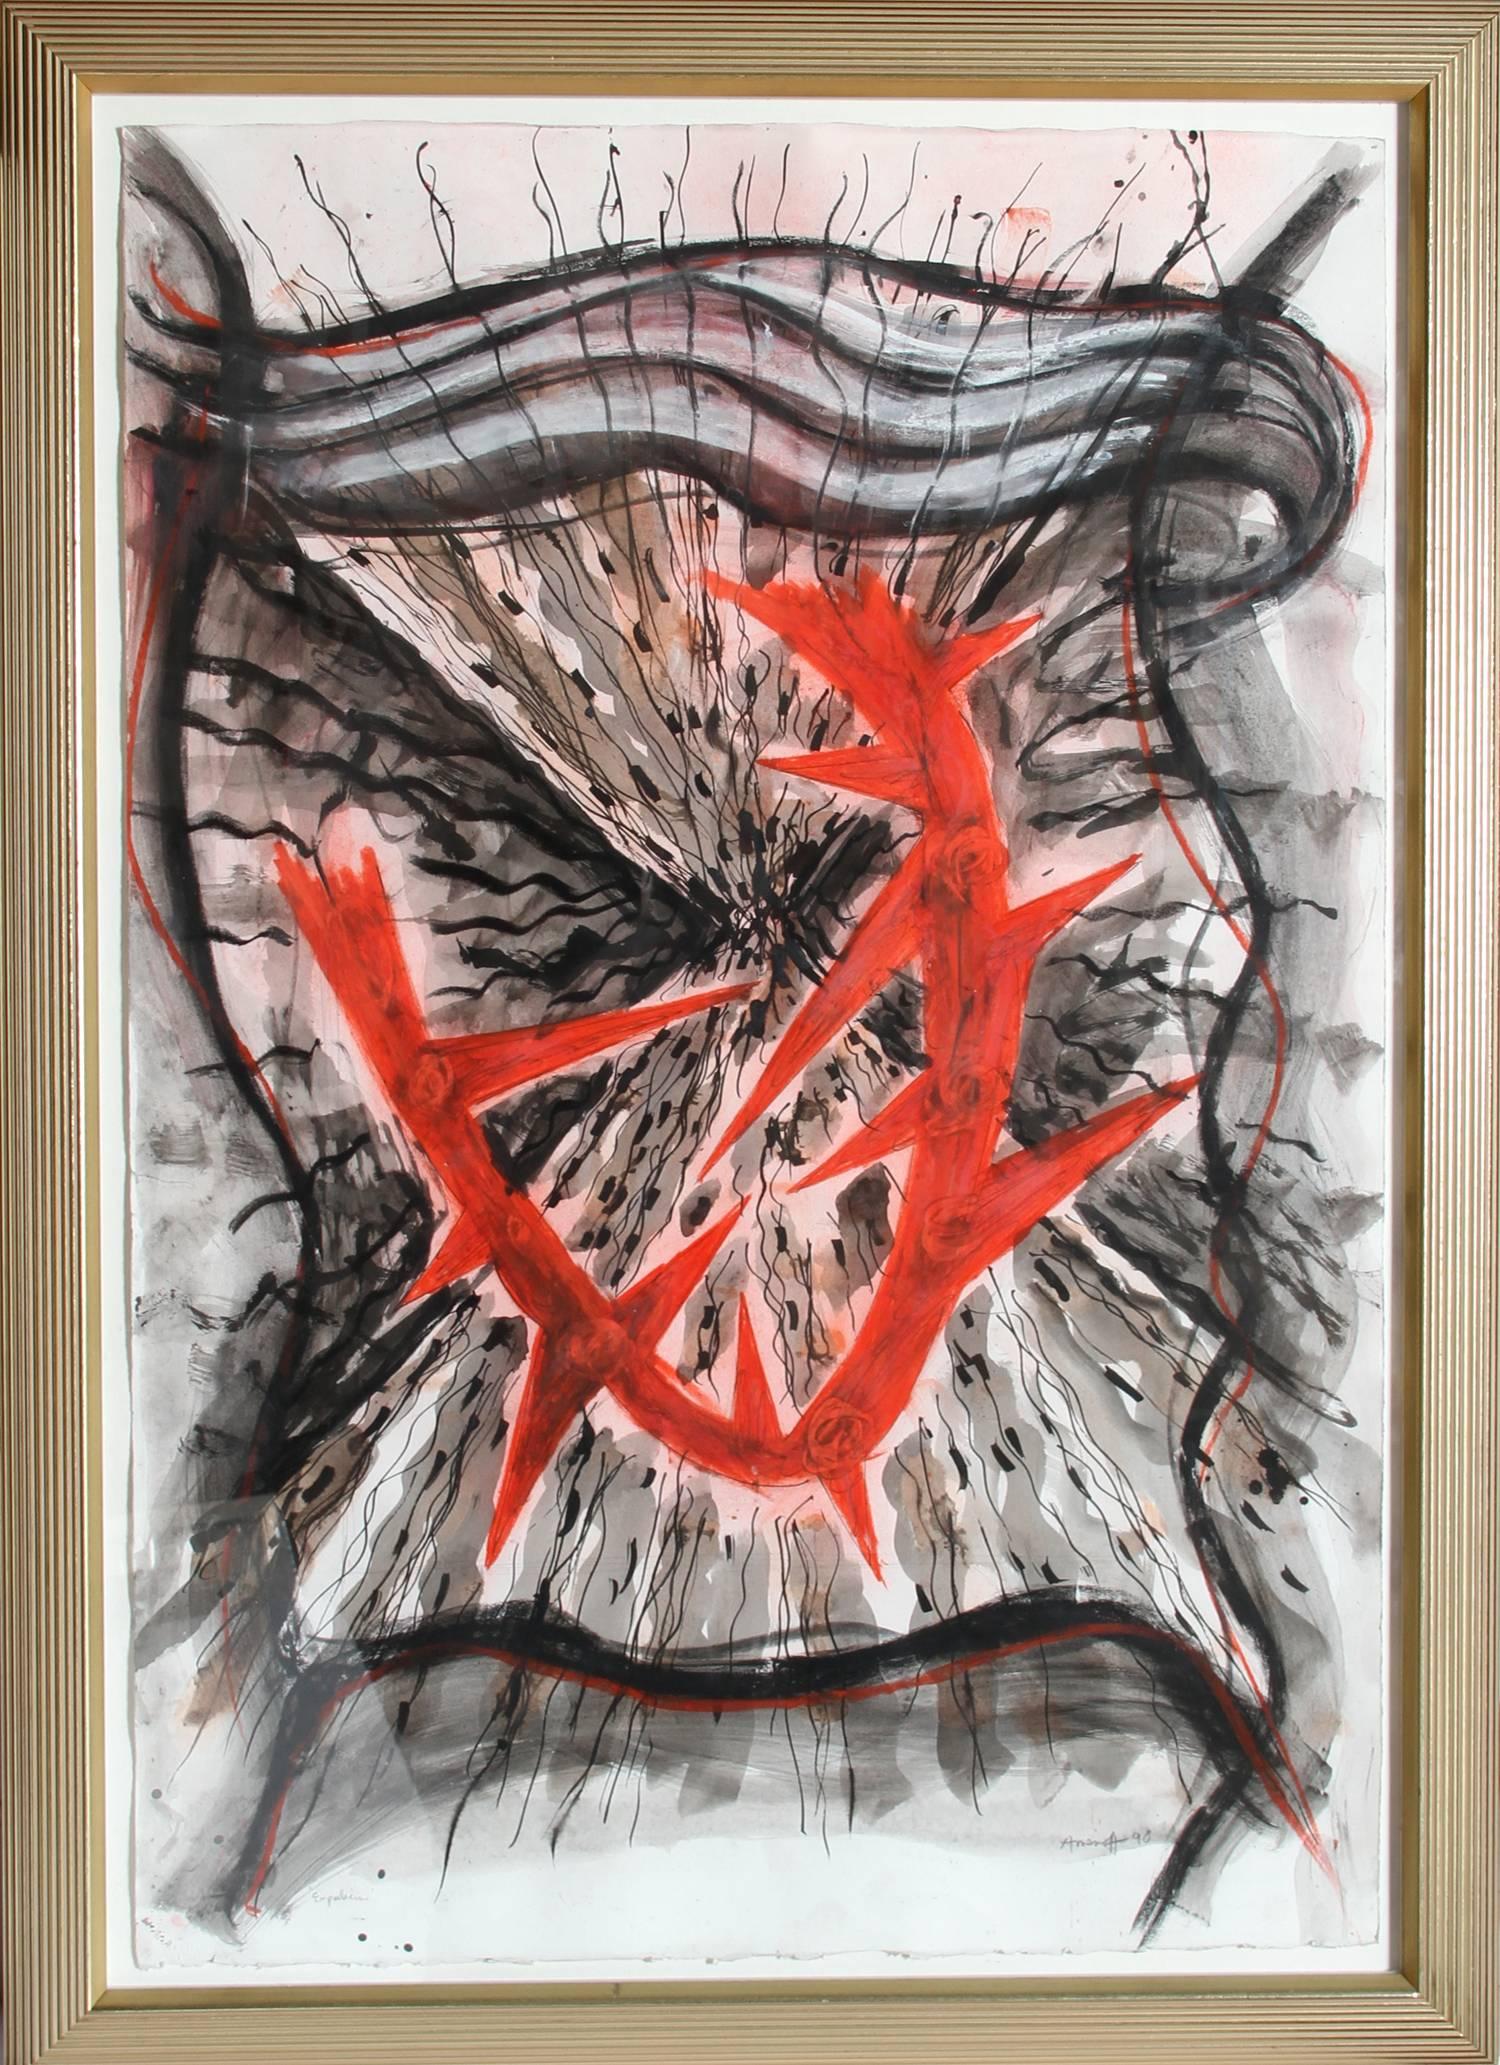 Artist: Gregory Amenoff, American (1948 - )
Title: Expulsion
Year: 1990
Medium: Mixed Media Painting on Paper, signed, titled and dated
Size: 38 in. x 26 in. (96.52 cm x 66.04 cm)